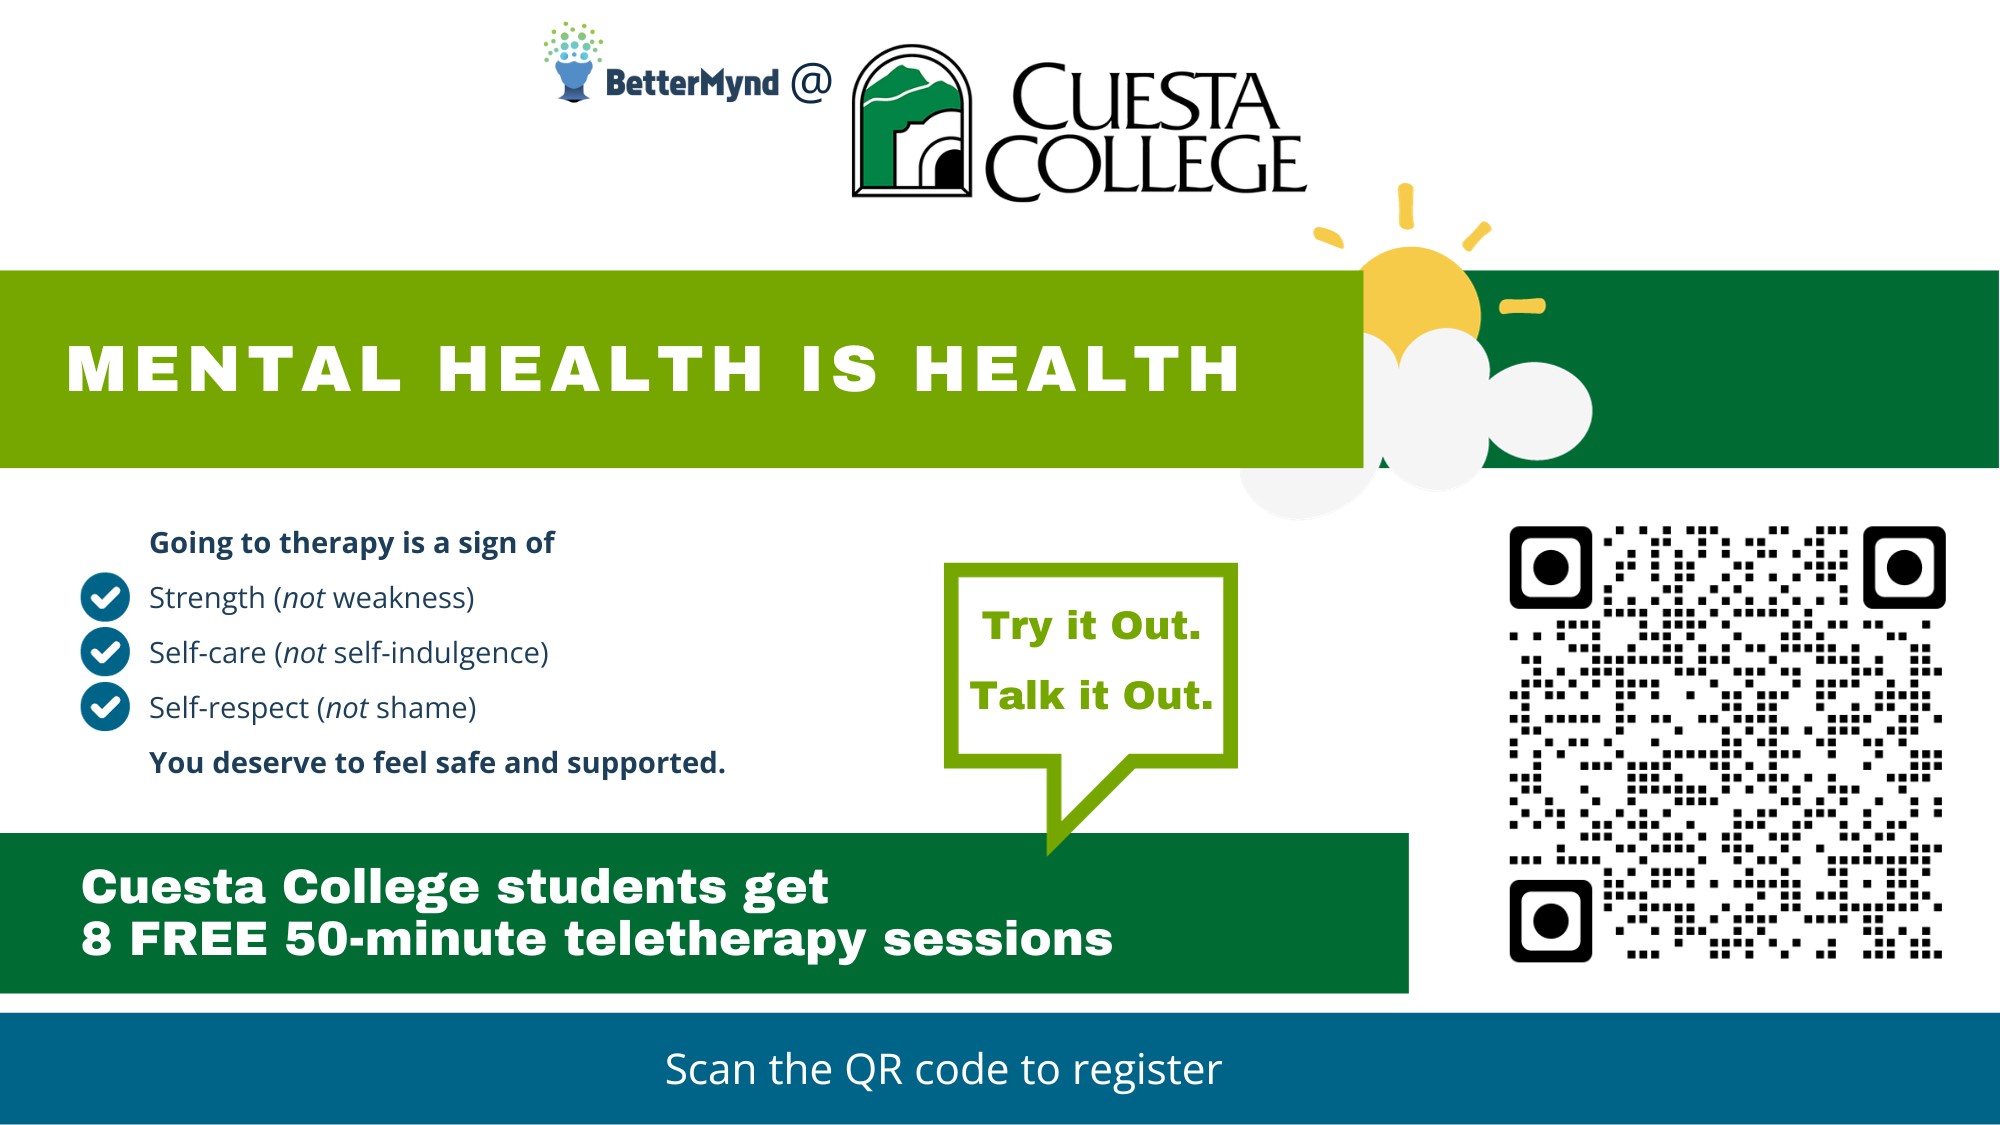 Cuesta College Students get 8 free 50-minute teletherapy sessions with BetterMynd